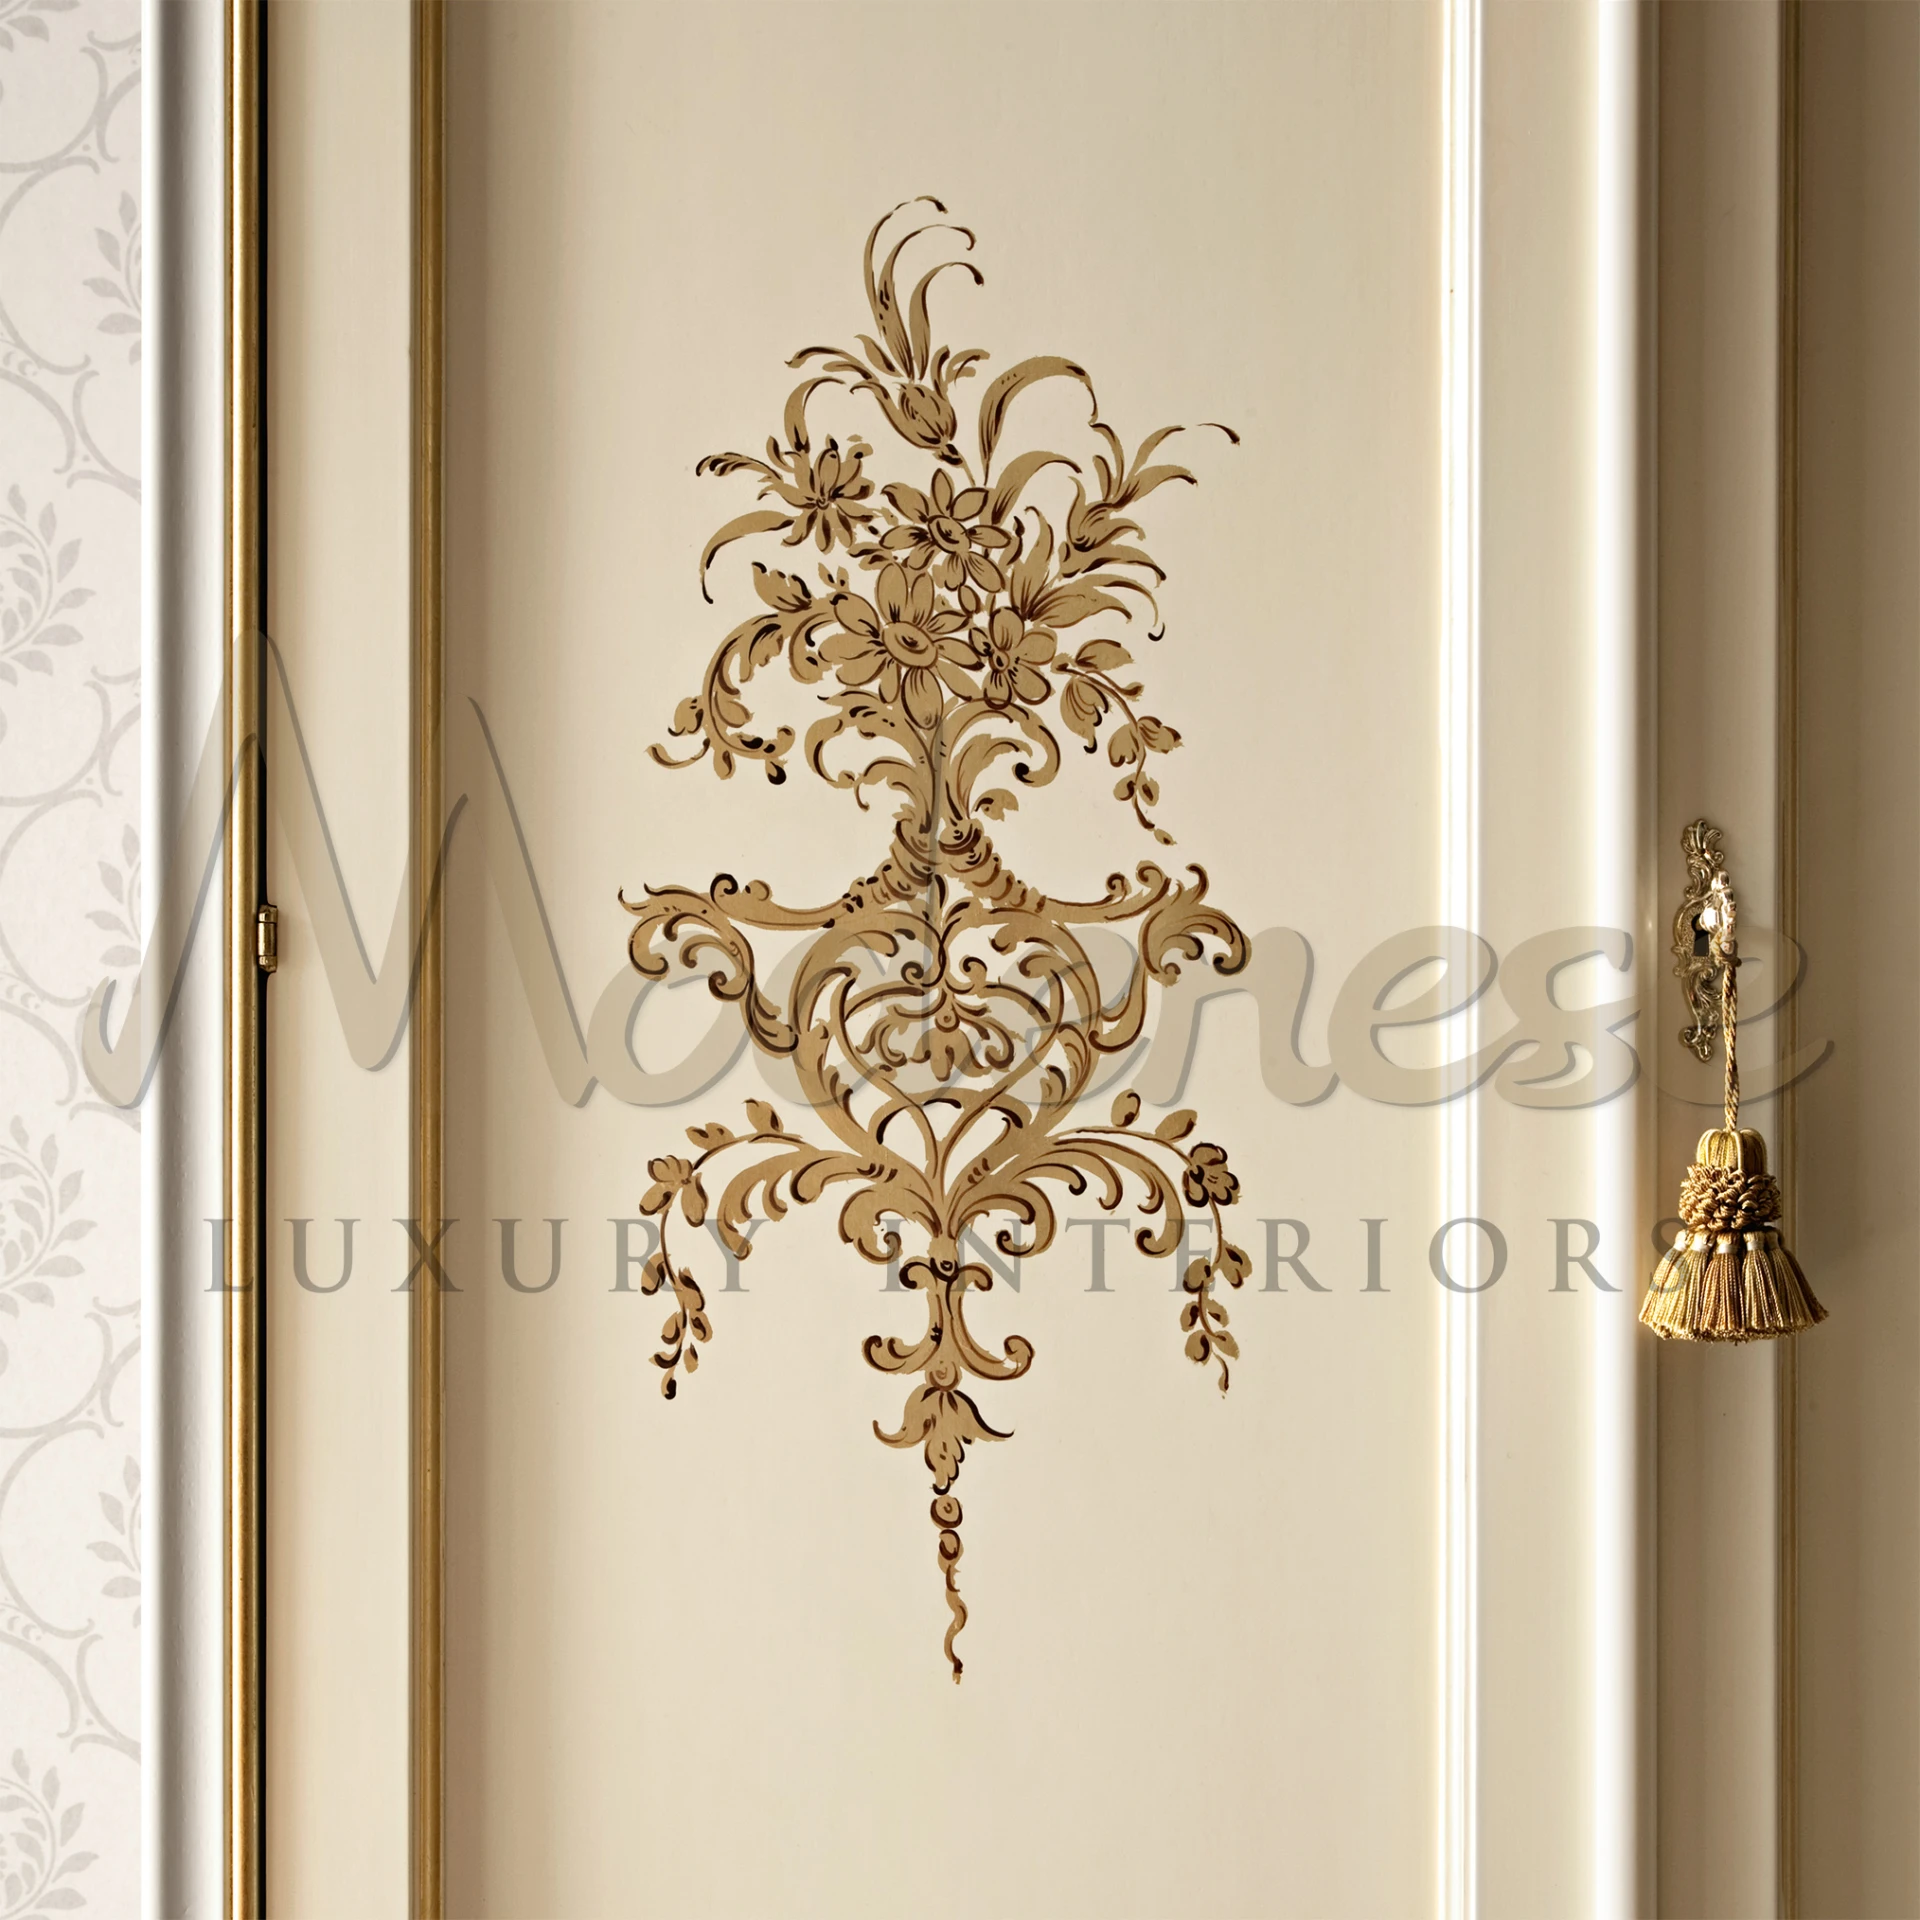 French-style ivory armoire wardrobe with ornate gold trim by Modenese Furniture